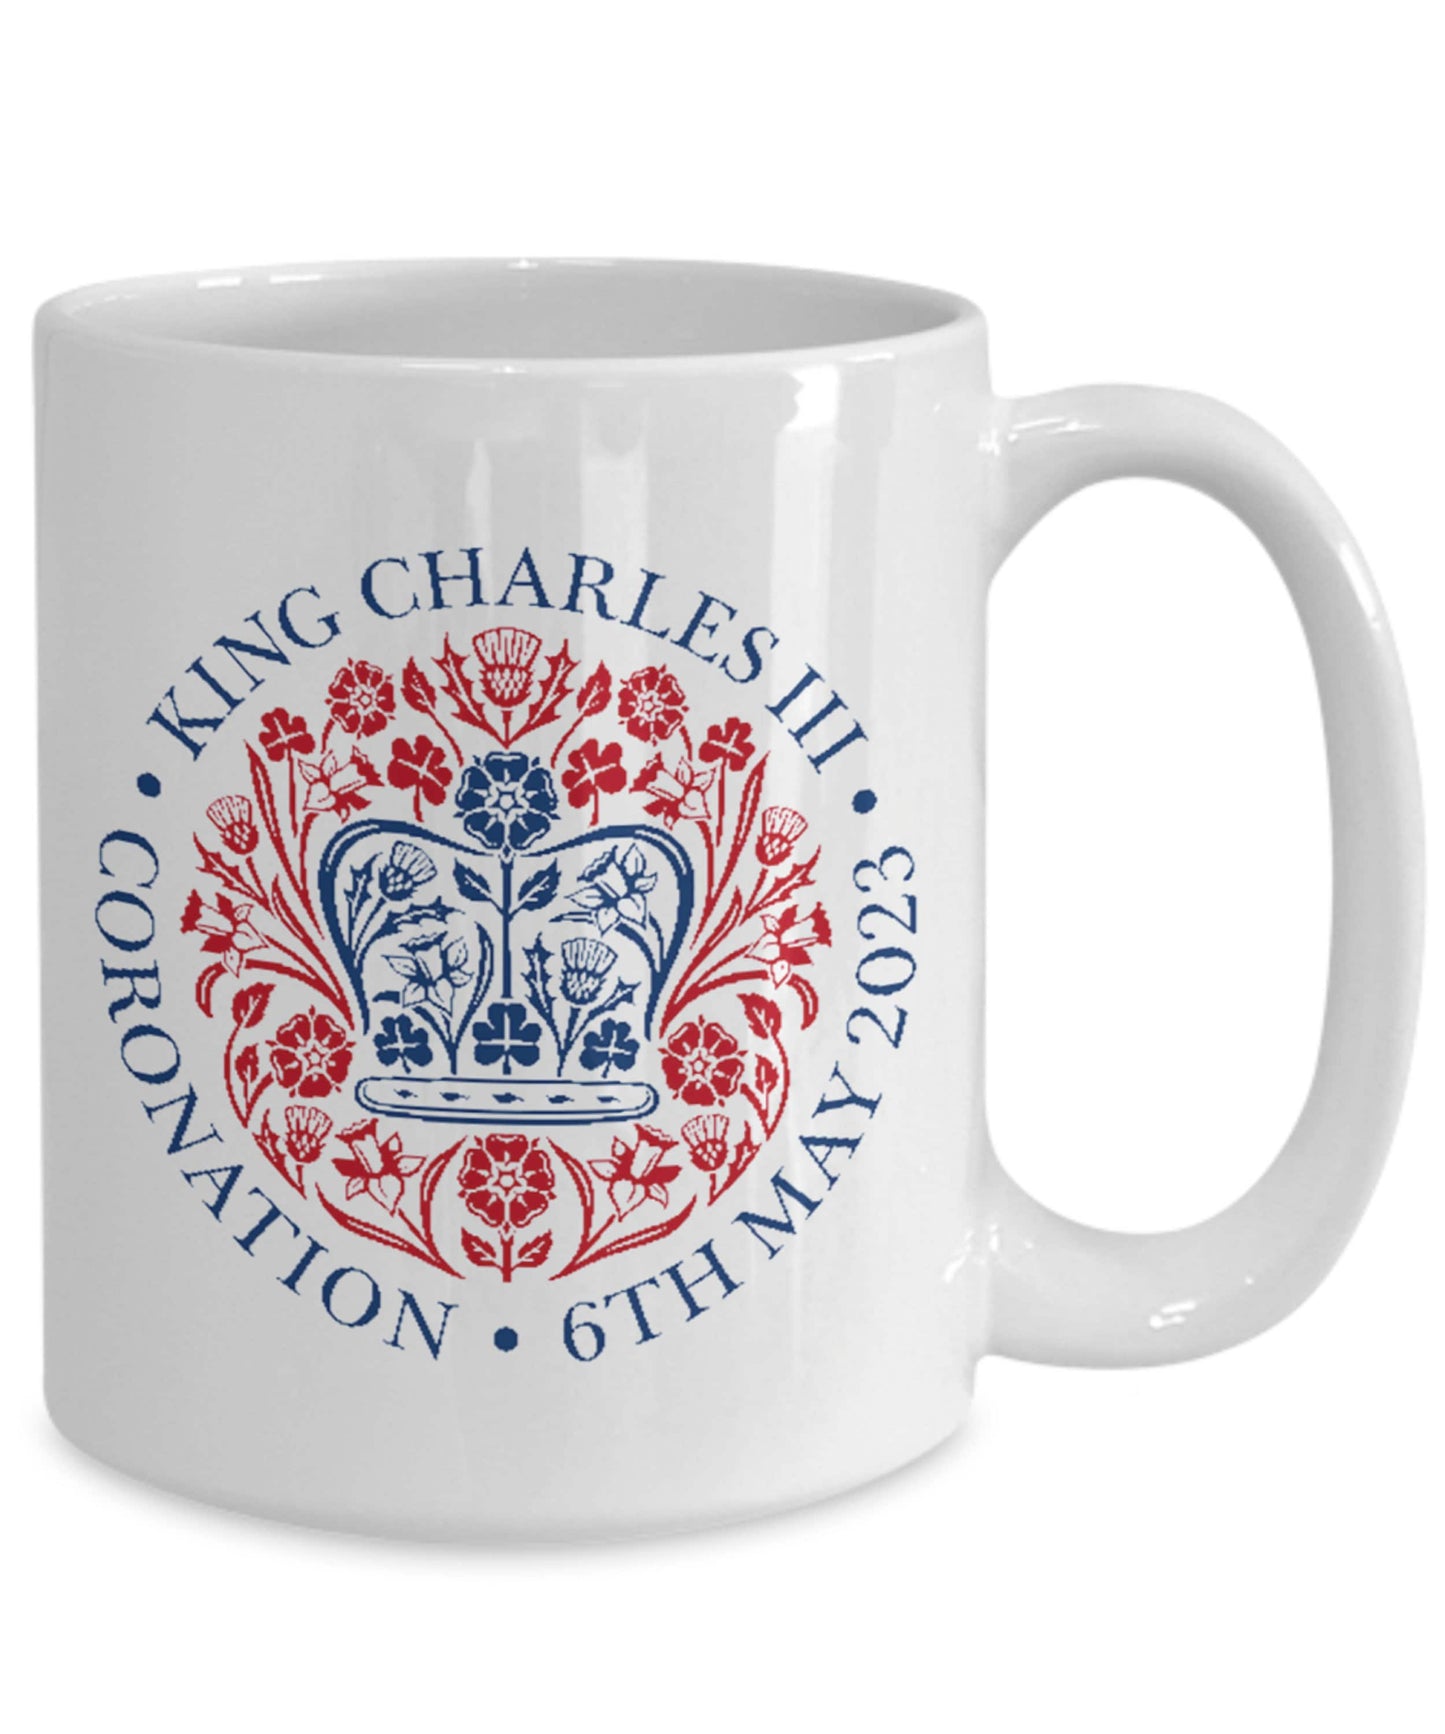 Commemorate King Charles III's coronation with our ceramic mug! Featuring the Union Jack and Buckingham Palace, it's the perfect keepsake.